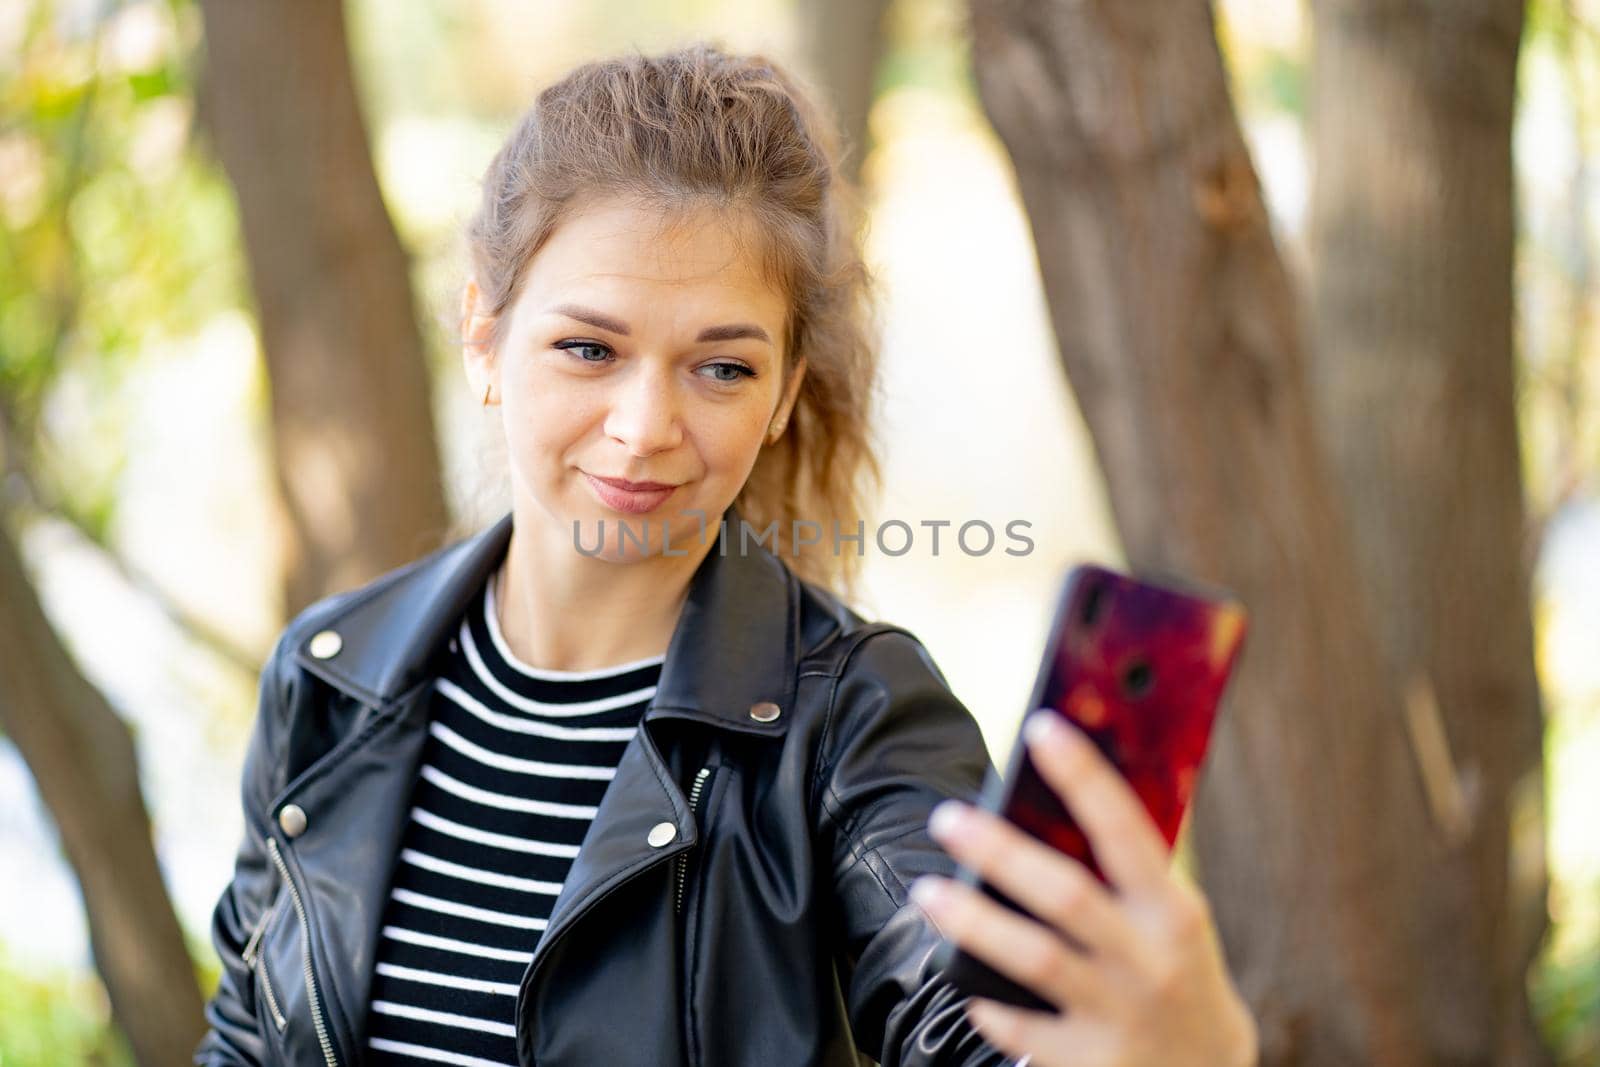 Young woman using smartphone in park. Smiling young female with long hair waving in wind browsing mobile phone while spending autumn day in park by epidemiks